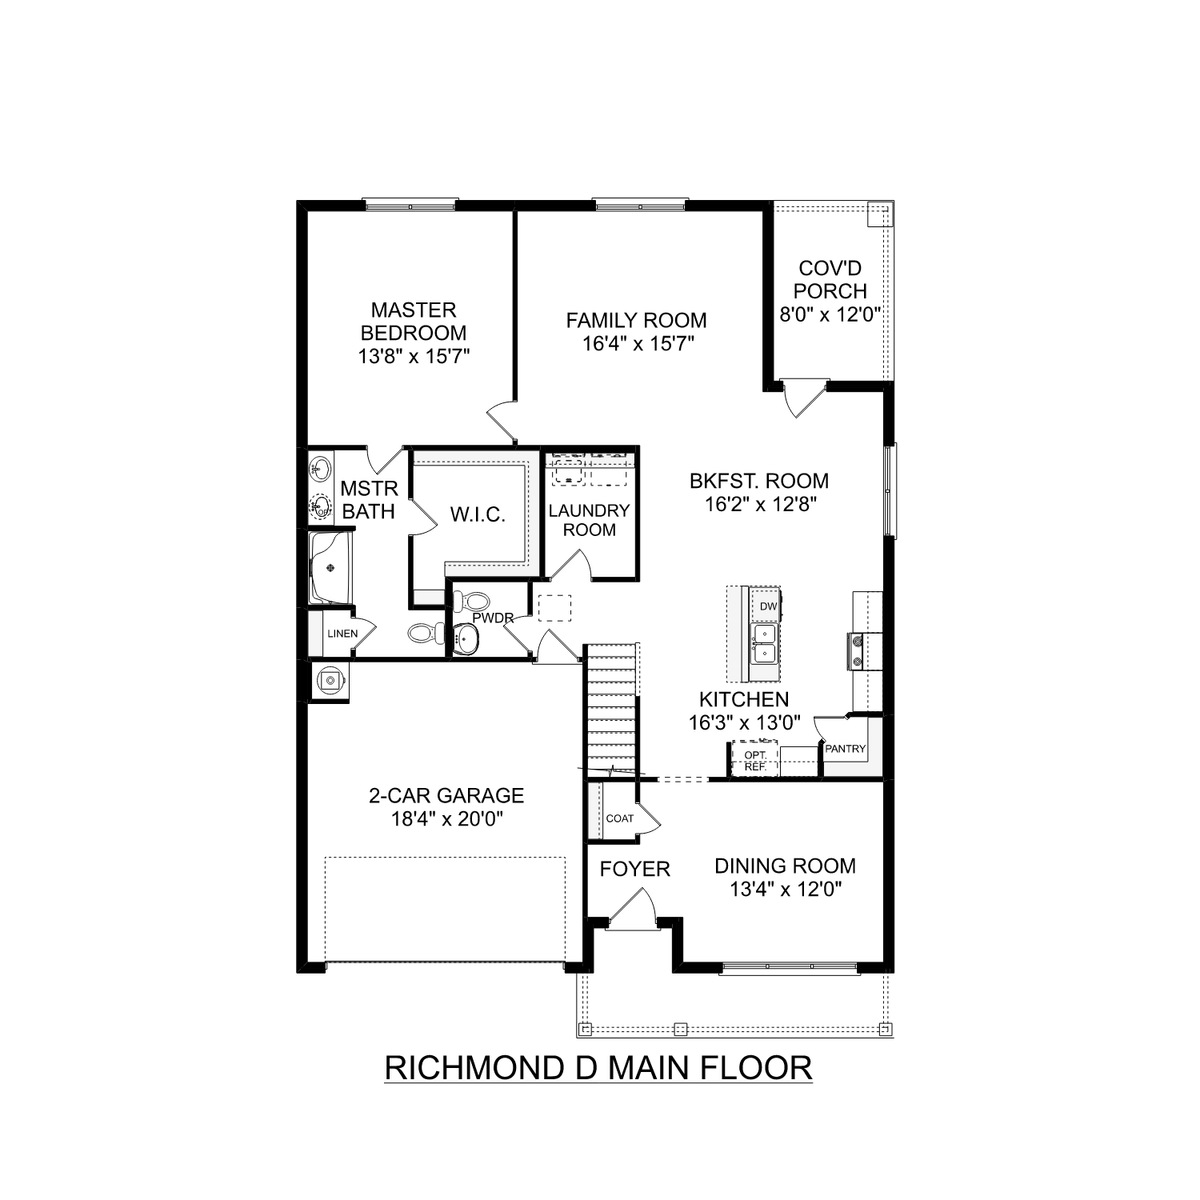 1 - The Richmond D buildable floor plan layout in Davidson Homes' Williams Pointe community.